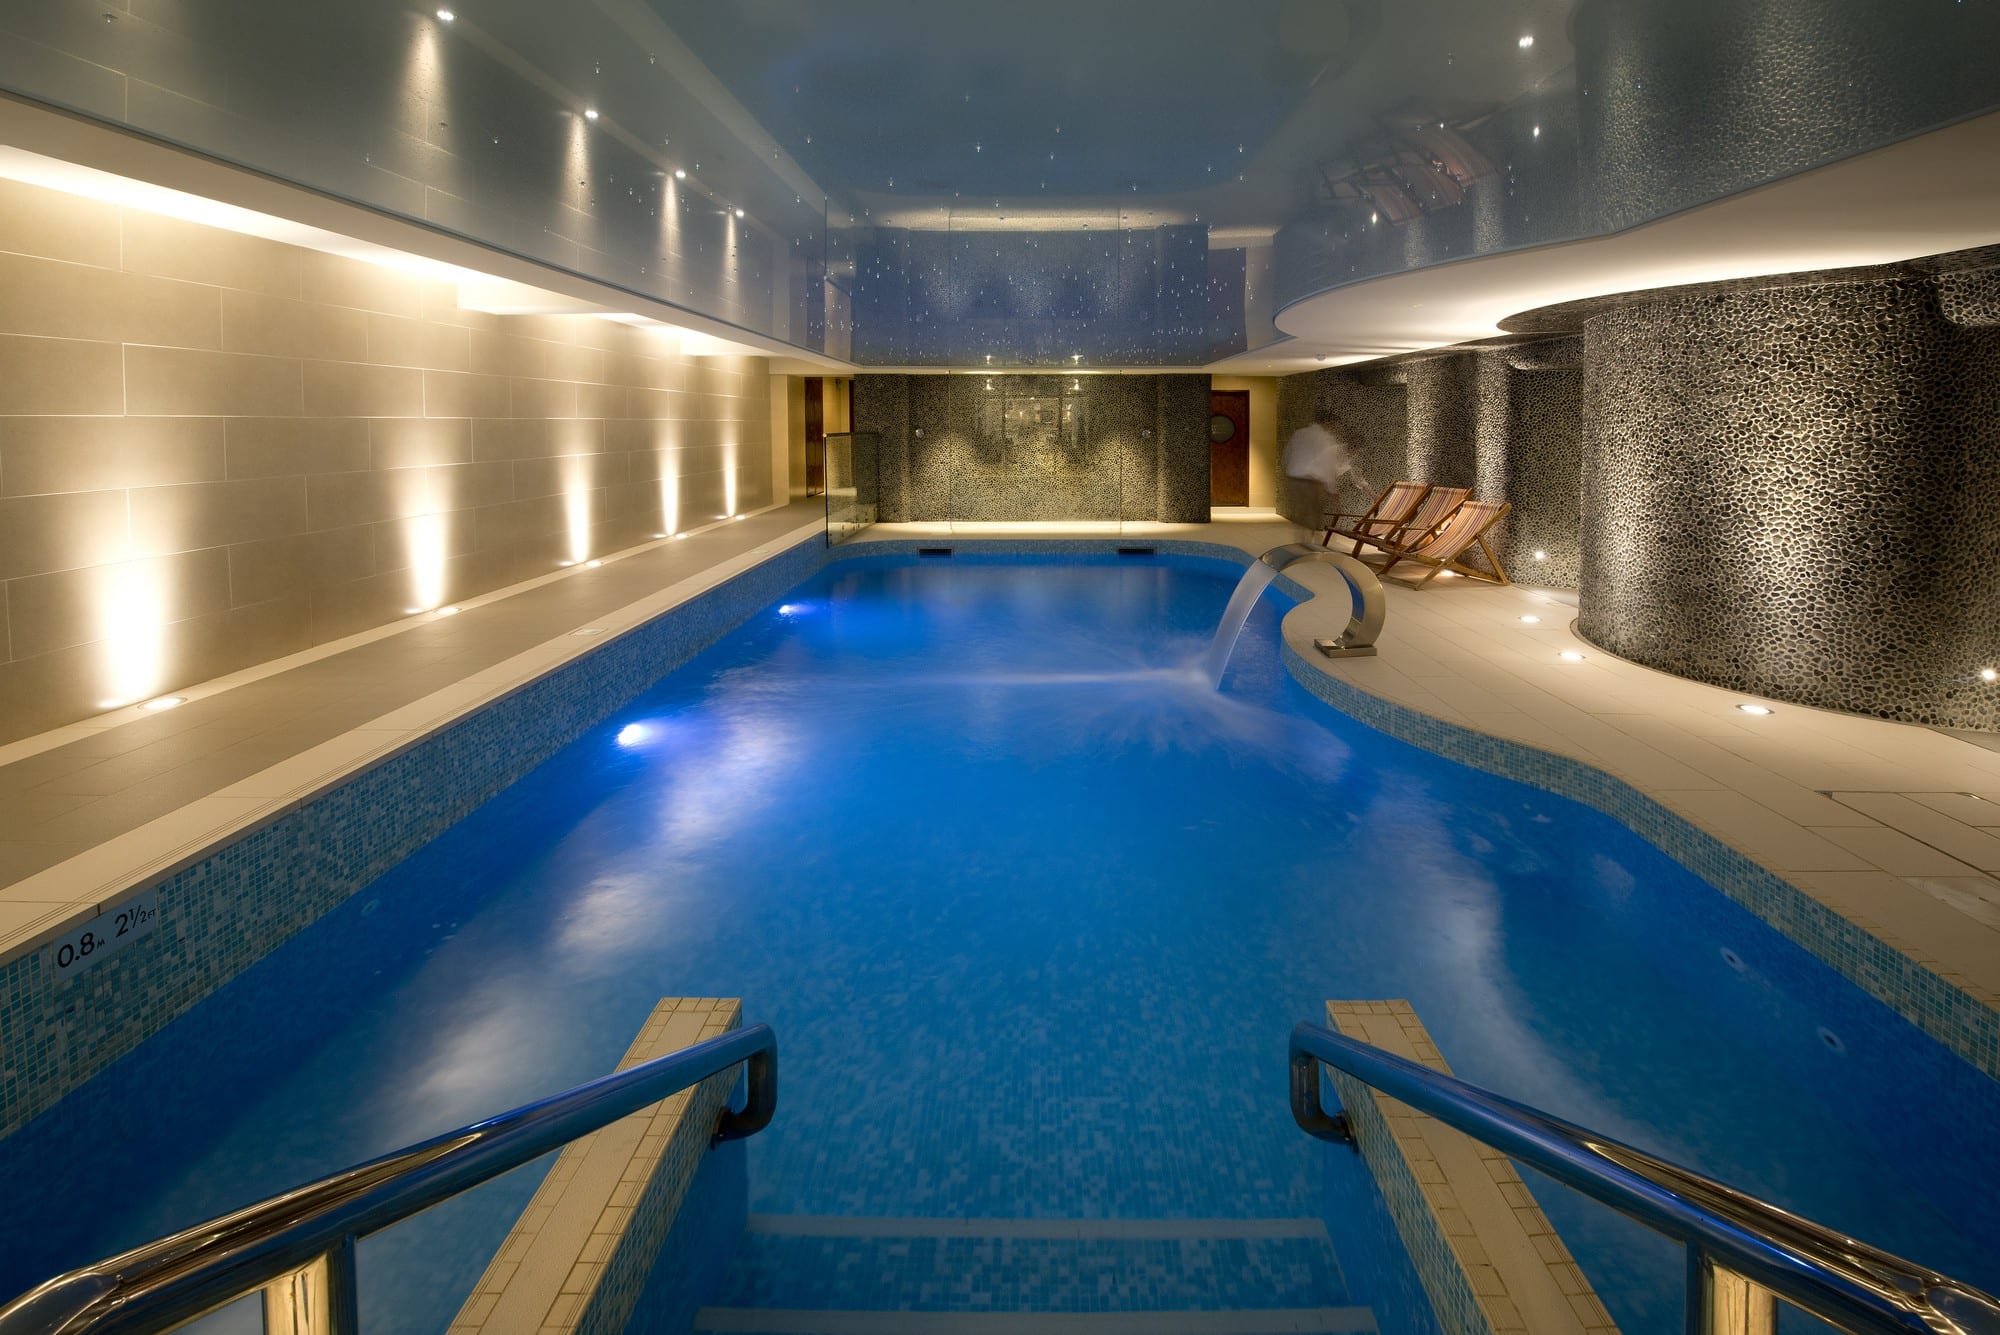 Inside spa pool with stone walls and water feature.